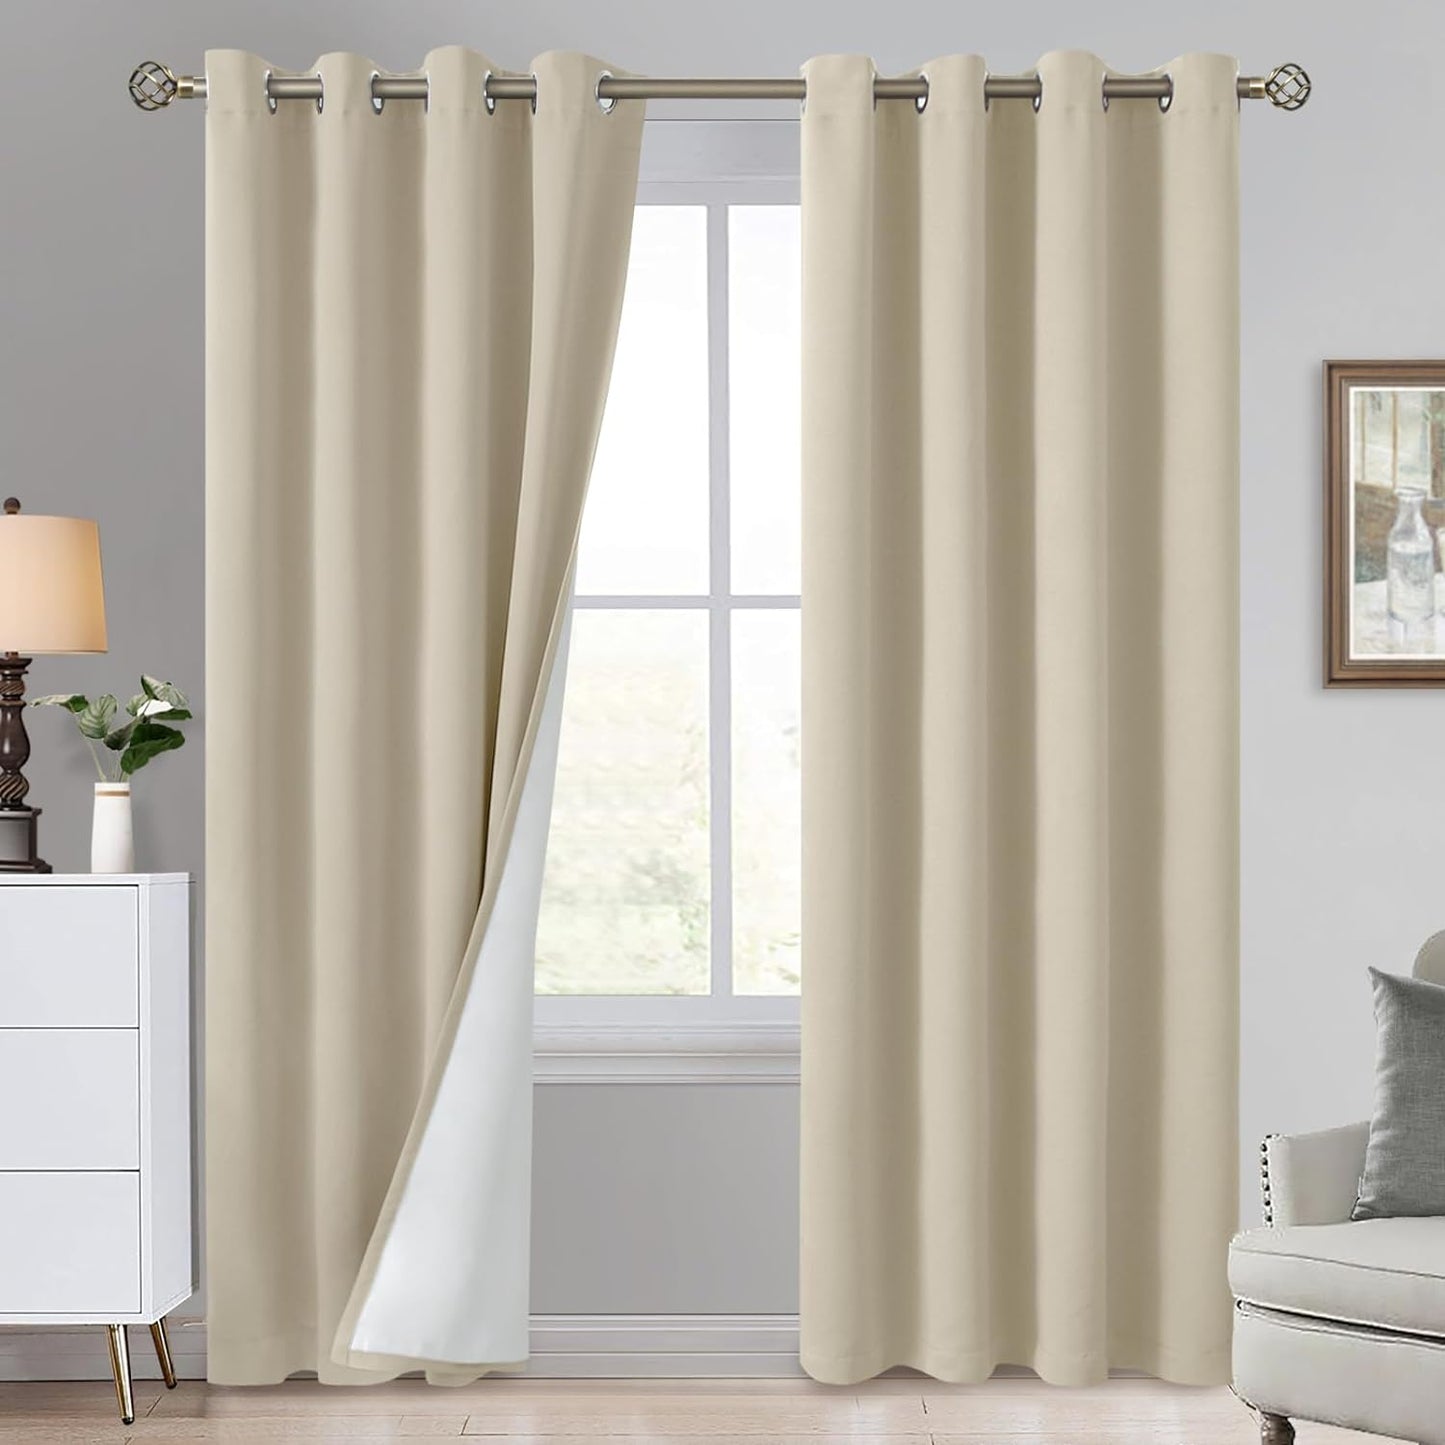 QUEMAS Short Blackout Curtains 54 Inch Length 2 Panels, 100% Light Blocking Thermal Insulated Soundproof Grommet Small Window Curtains for Bedroom Basement with Black Liner, Each 42 Inch Wide, White  QUEMAS Beige + White Lining W52 X L95 